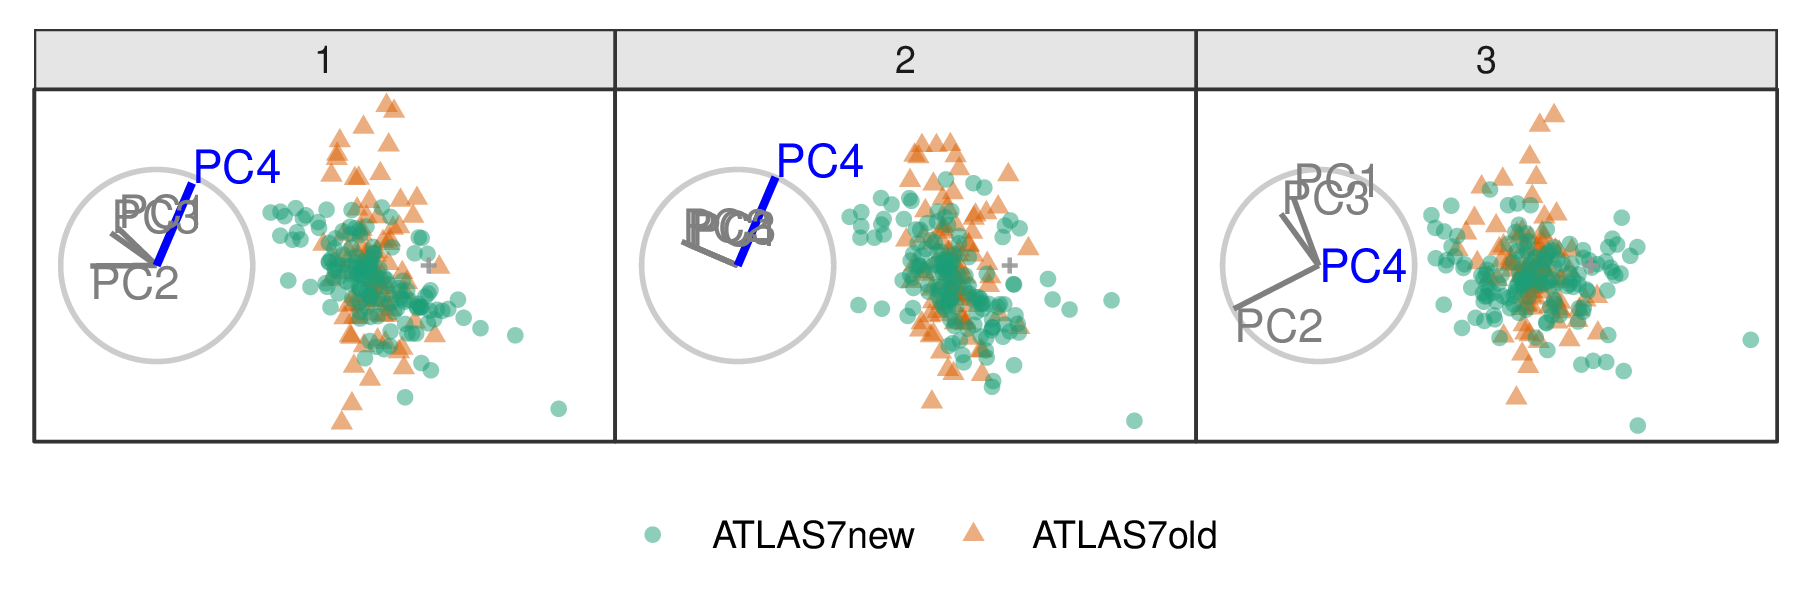 Select frames from a radial tour of PC4 within the jet cluster, with color indicating experiment type: ATLAS7new (green) and ATLAS7old (orange). When PC4 is removed from the projection (frame 10), and there is little difference between the clusters, suggesting that PC4 is vital for distinguishing the experiments.